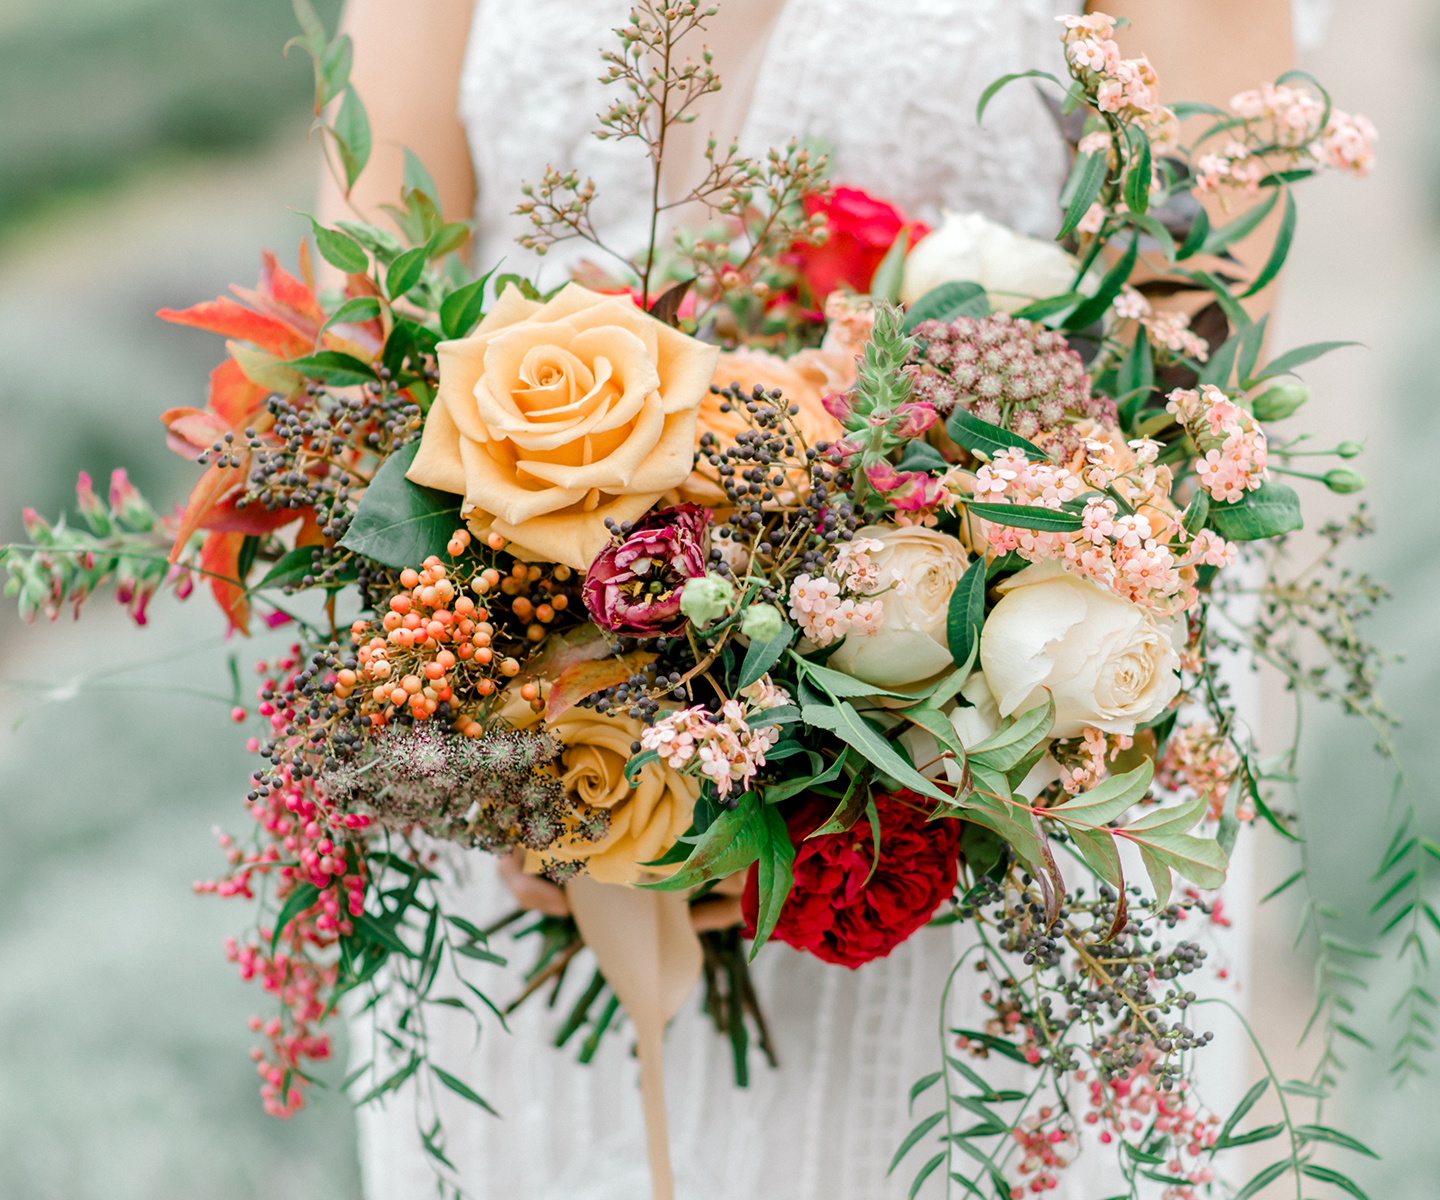 Bridal Bouquet Inspiration for Summer: 12 of the Prettiest Bouquets We've Seen This Summer in Alberta and the Rockies